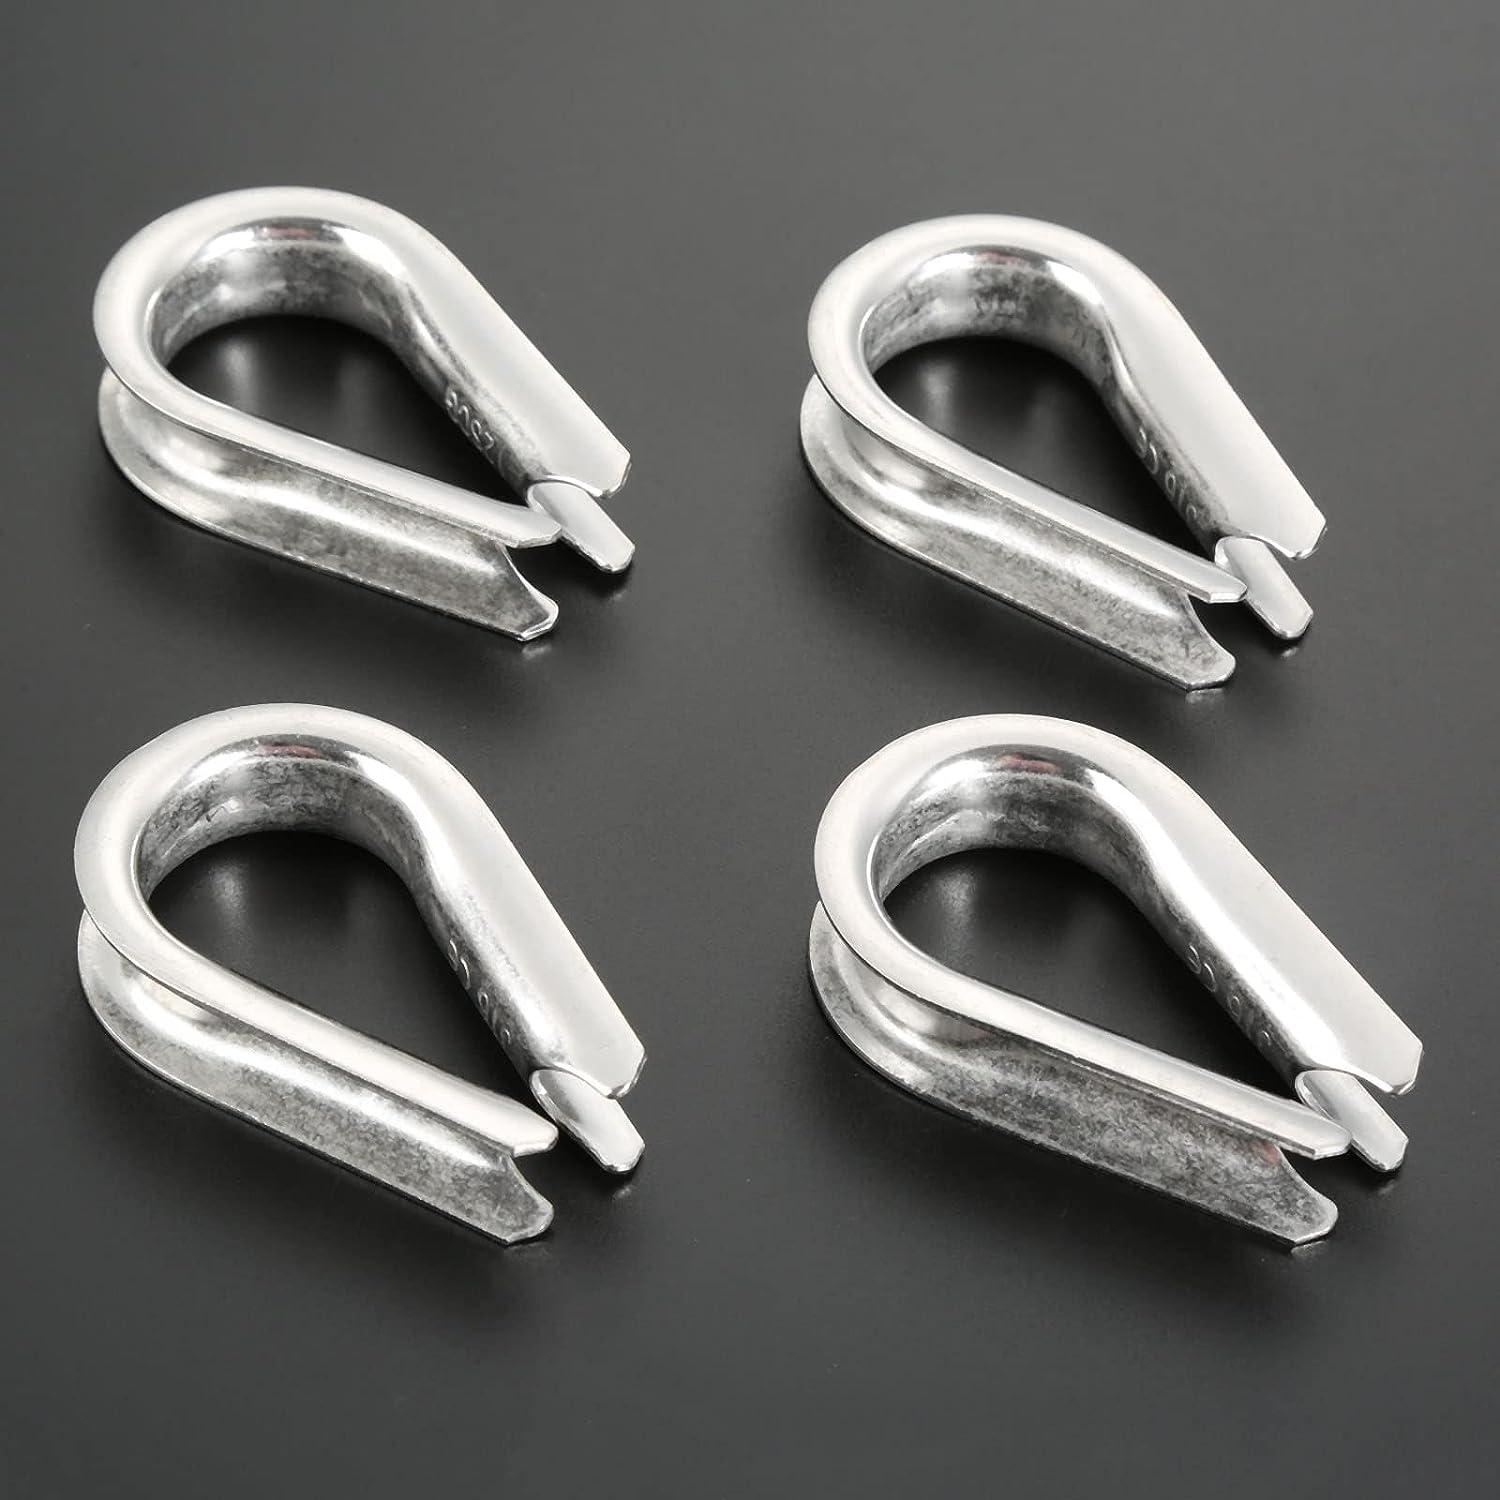 Stainless Wire Rope Thimbles, Cable Rigging